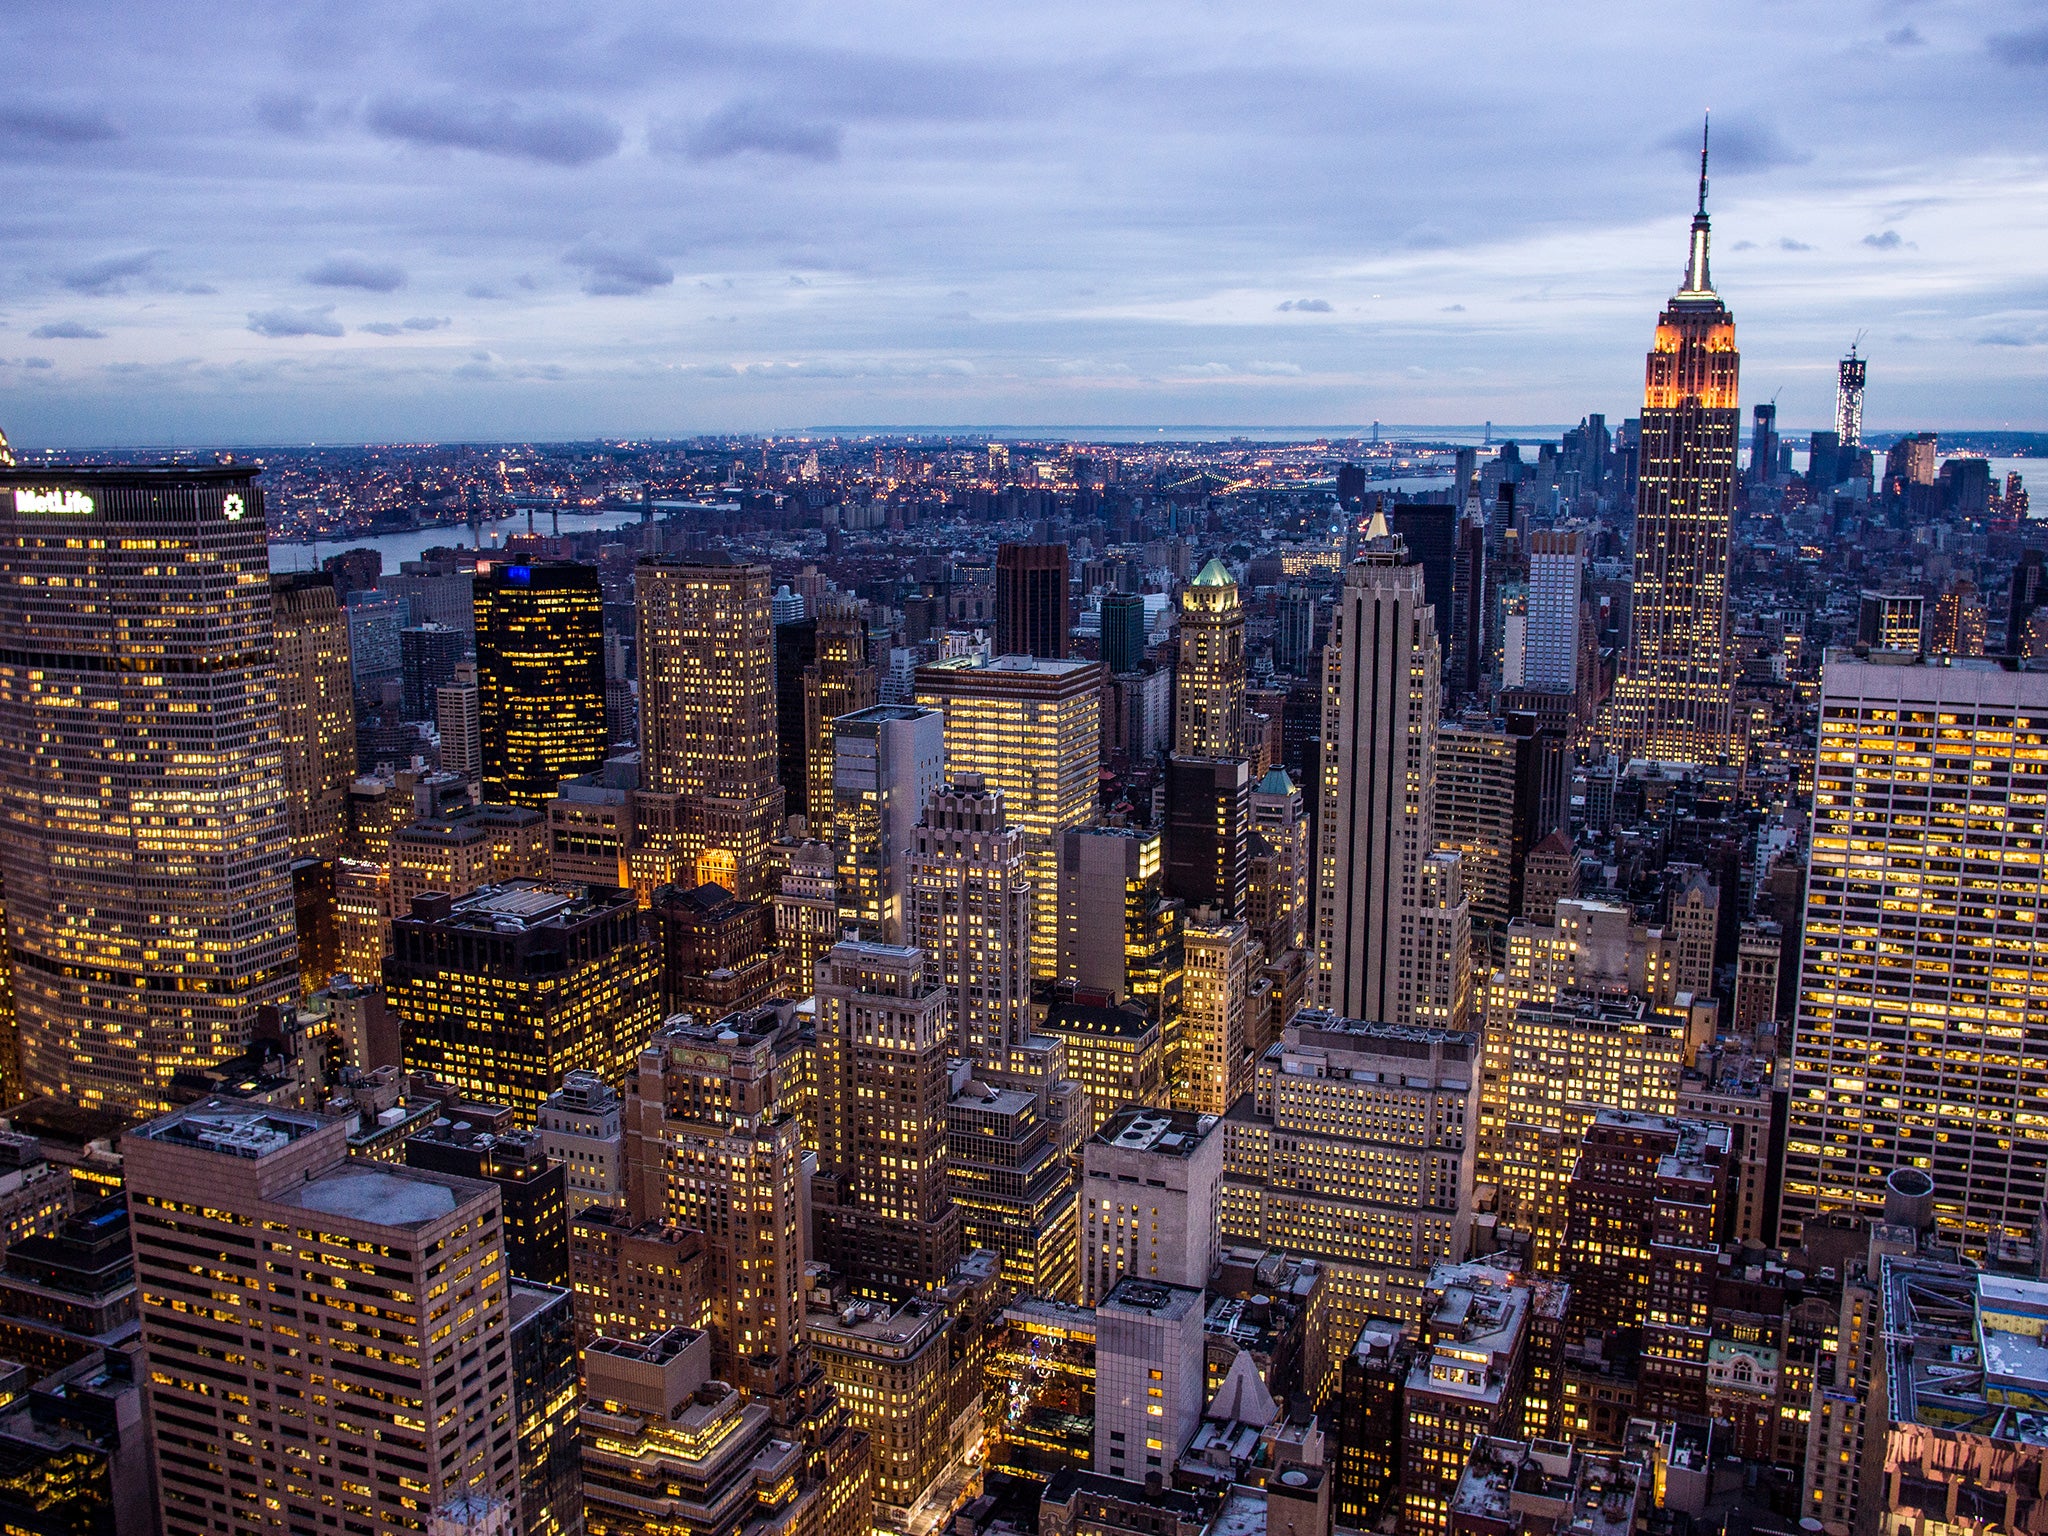 New York will switch off its non-essential lights across state-run buildings to help the birds